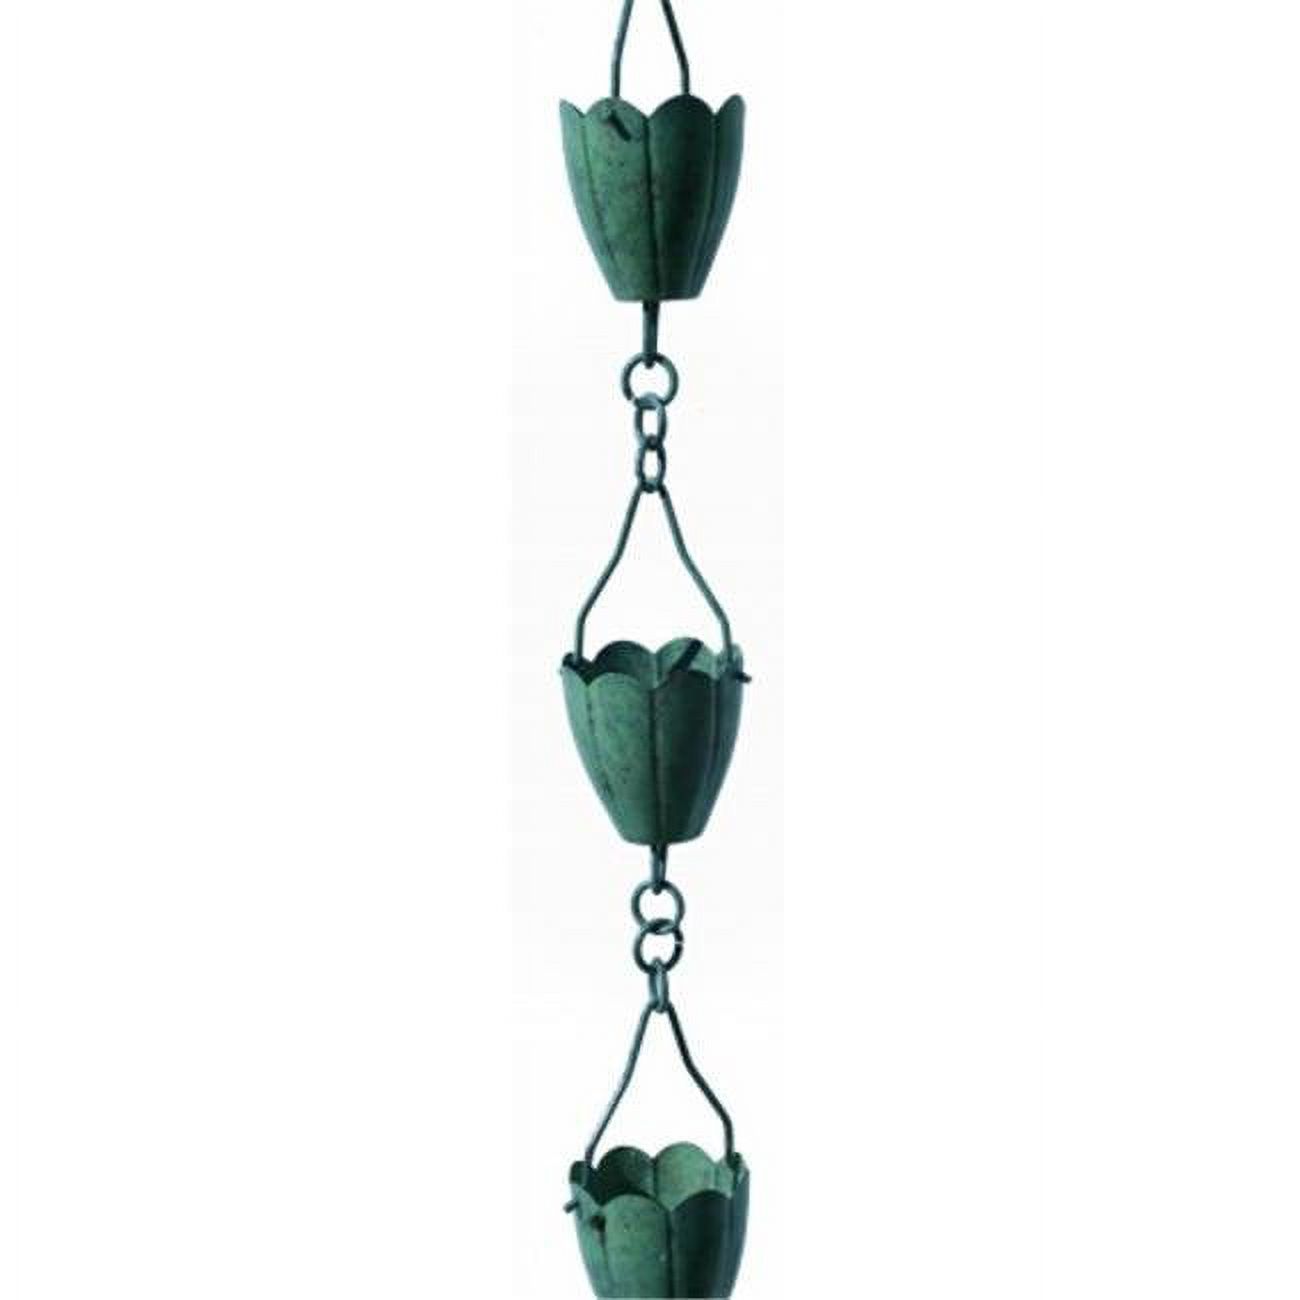 Patina Products Verdigris Flower Cup Rain Chain R253 - image 1 of 3